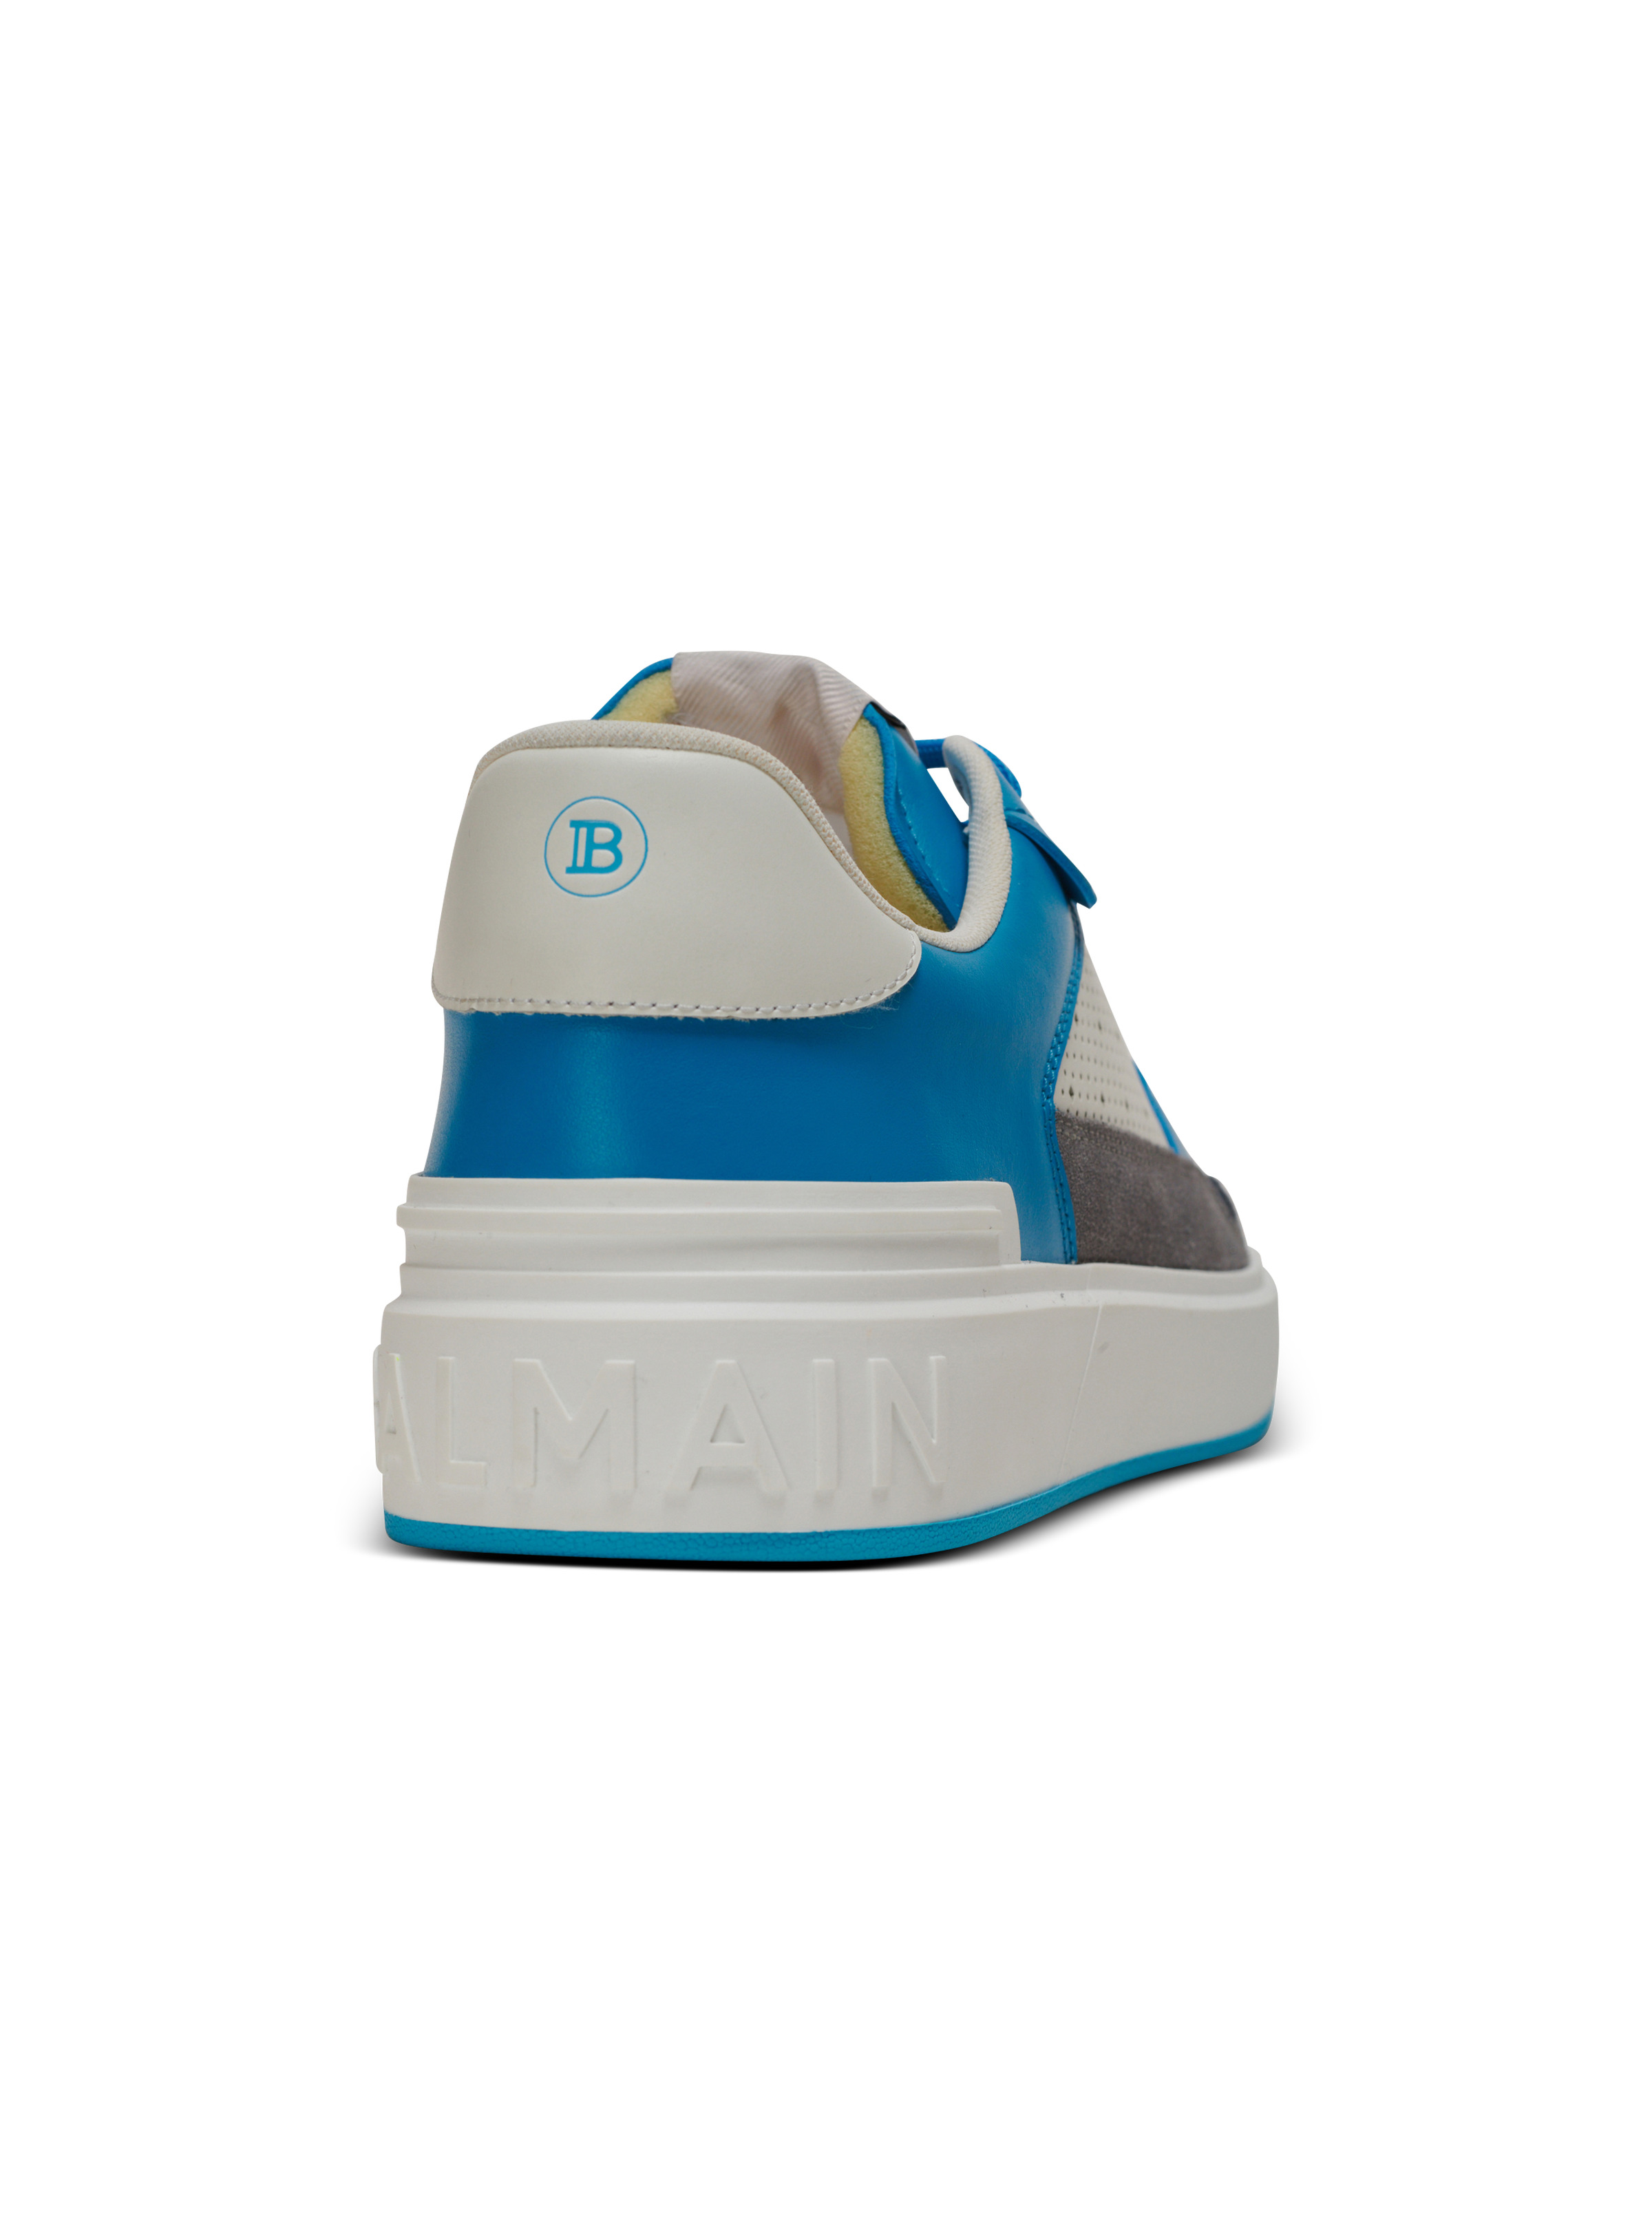 B-Court Flip trainers in calfskin and suede - 9